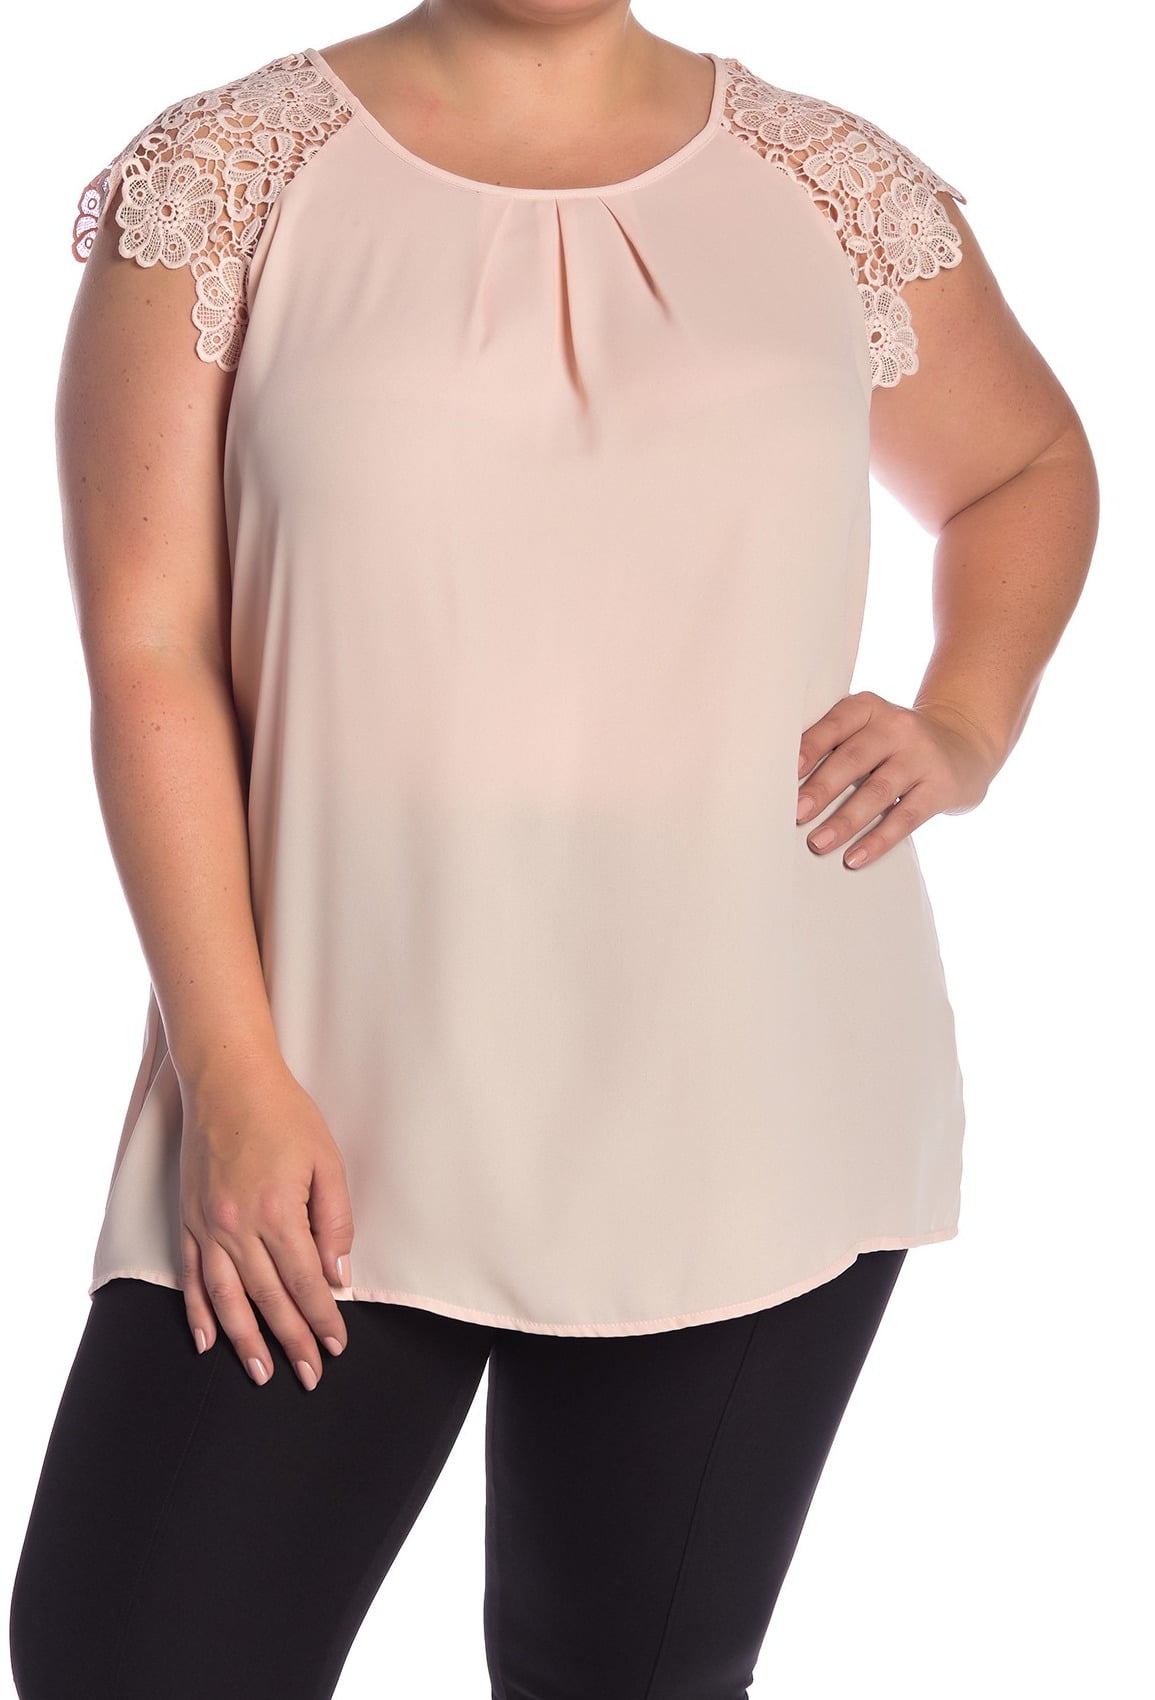 Philosophy Tops & Blouses - Womens Rose Plus Pleated Neck Lace Sleeve ...